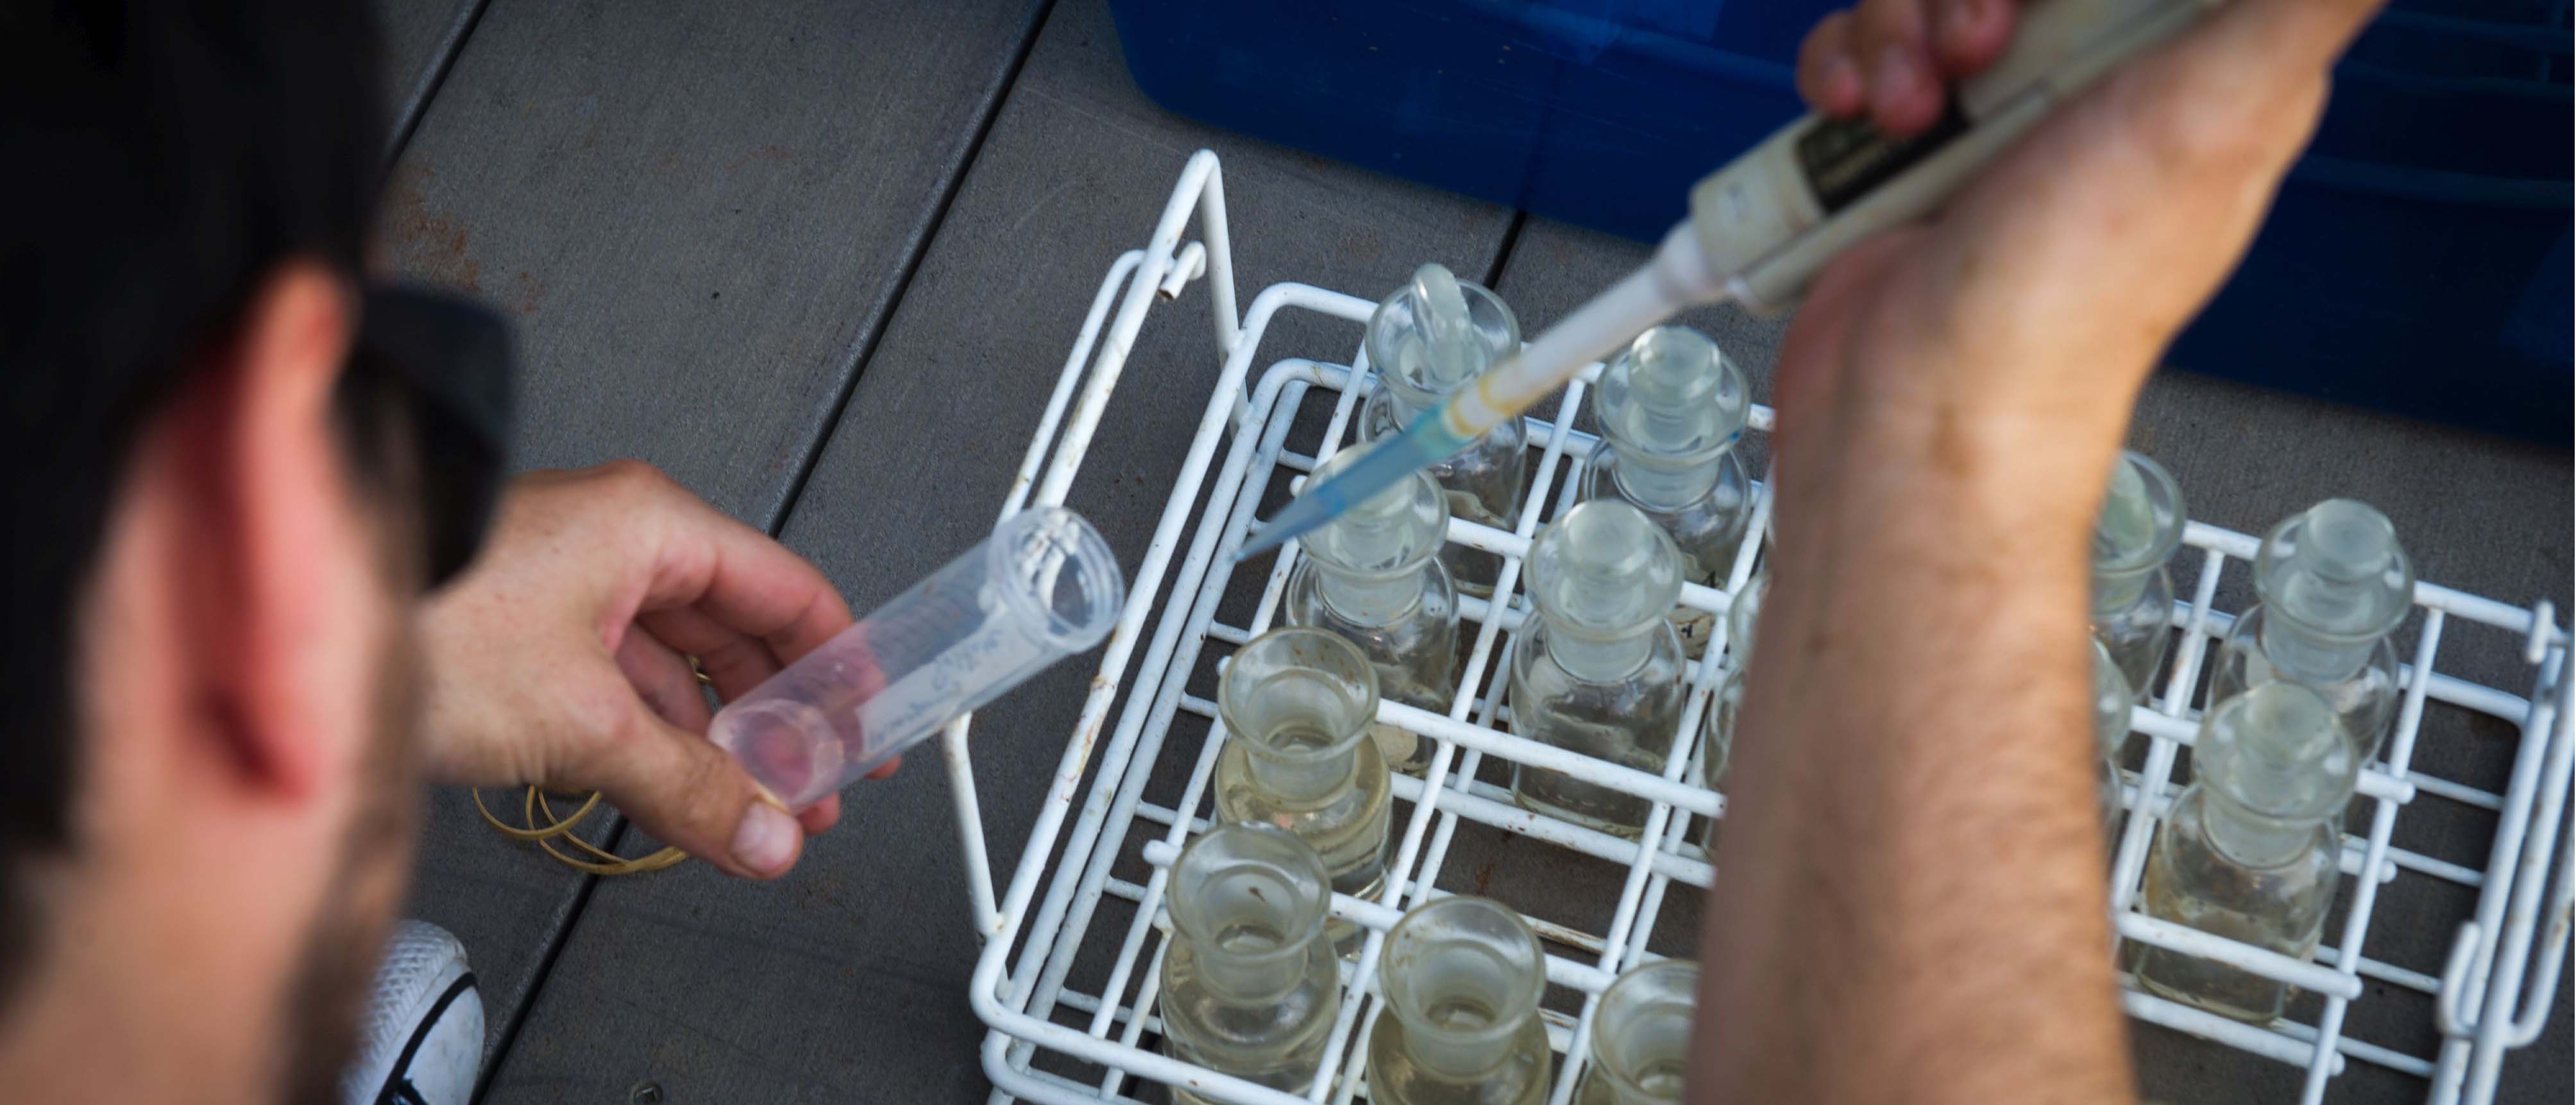 small vials being filled with water from dropper on a pier